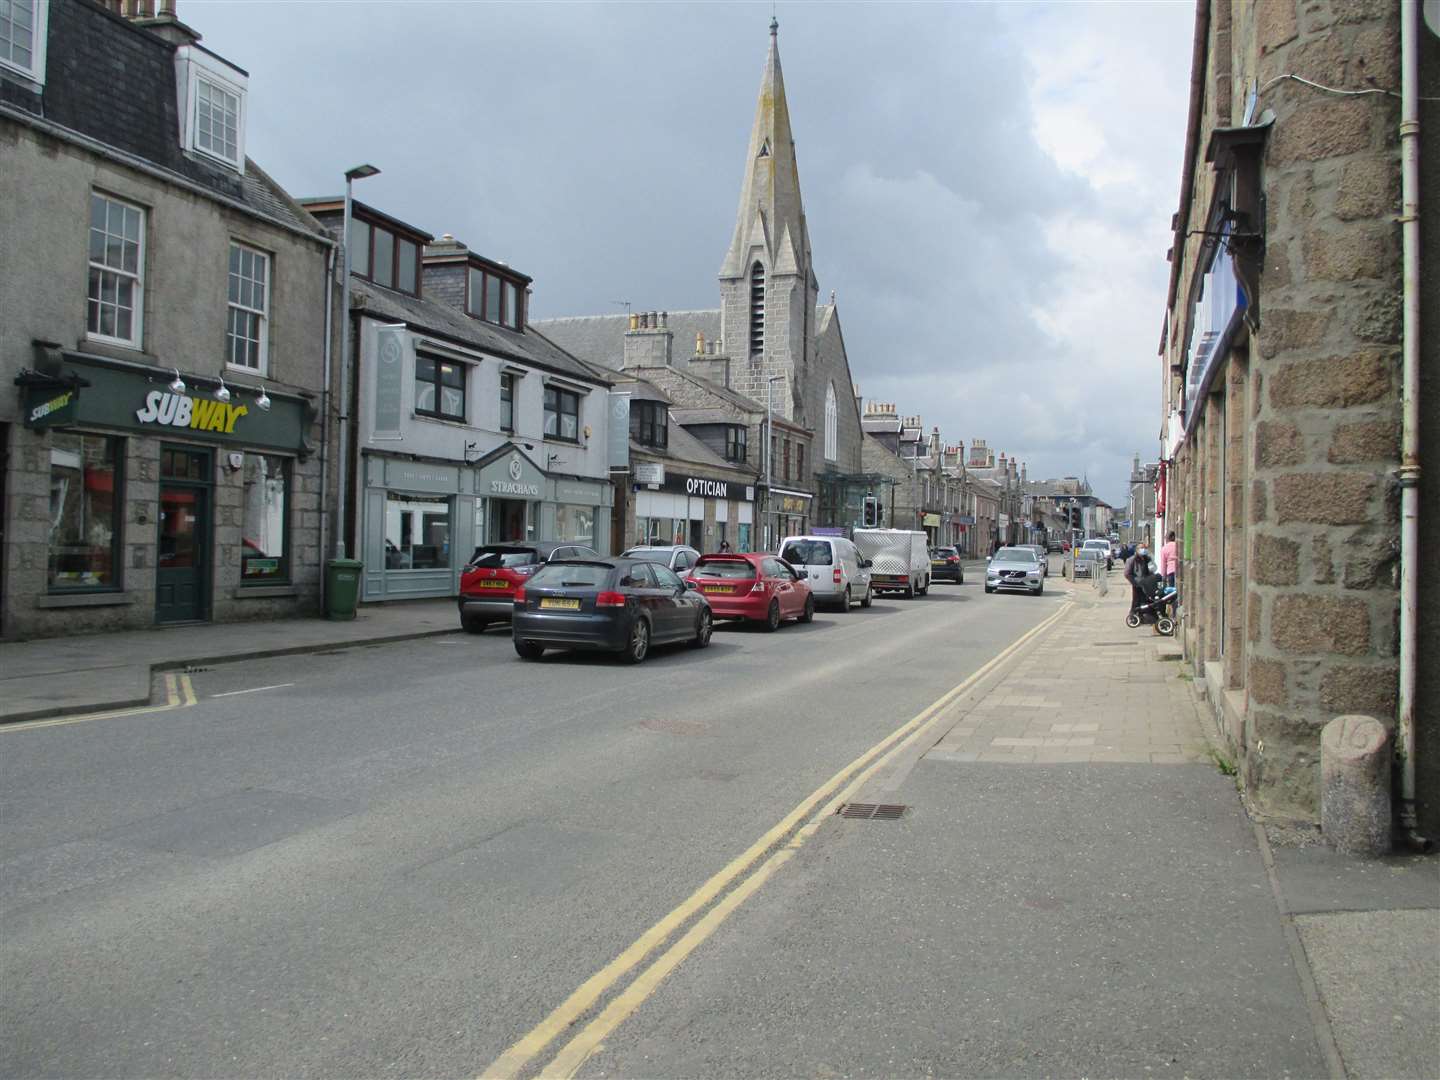 Spaces for People measures have been removed from Inverurie town centre.